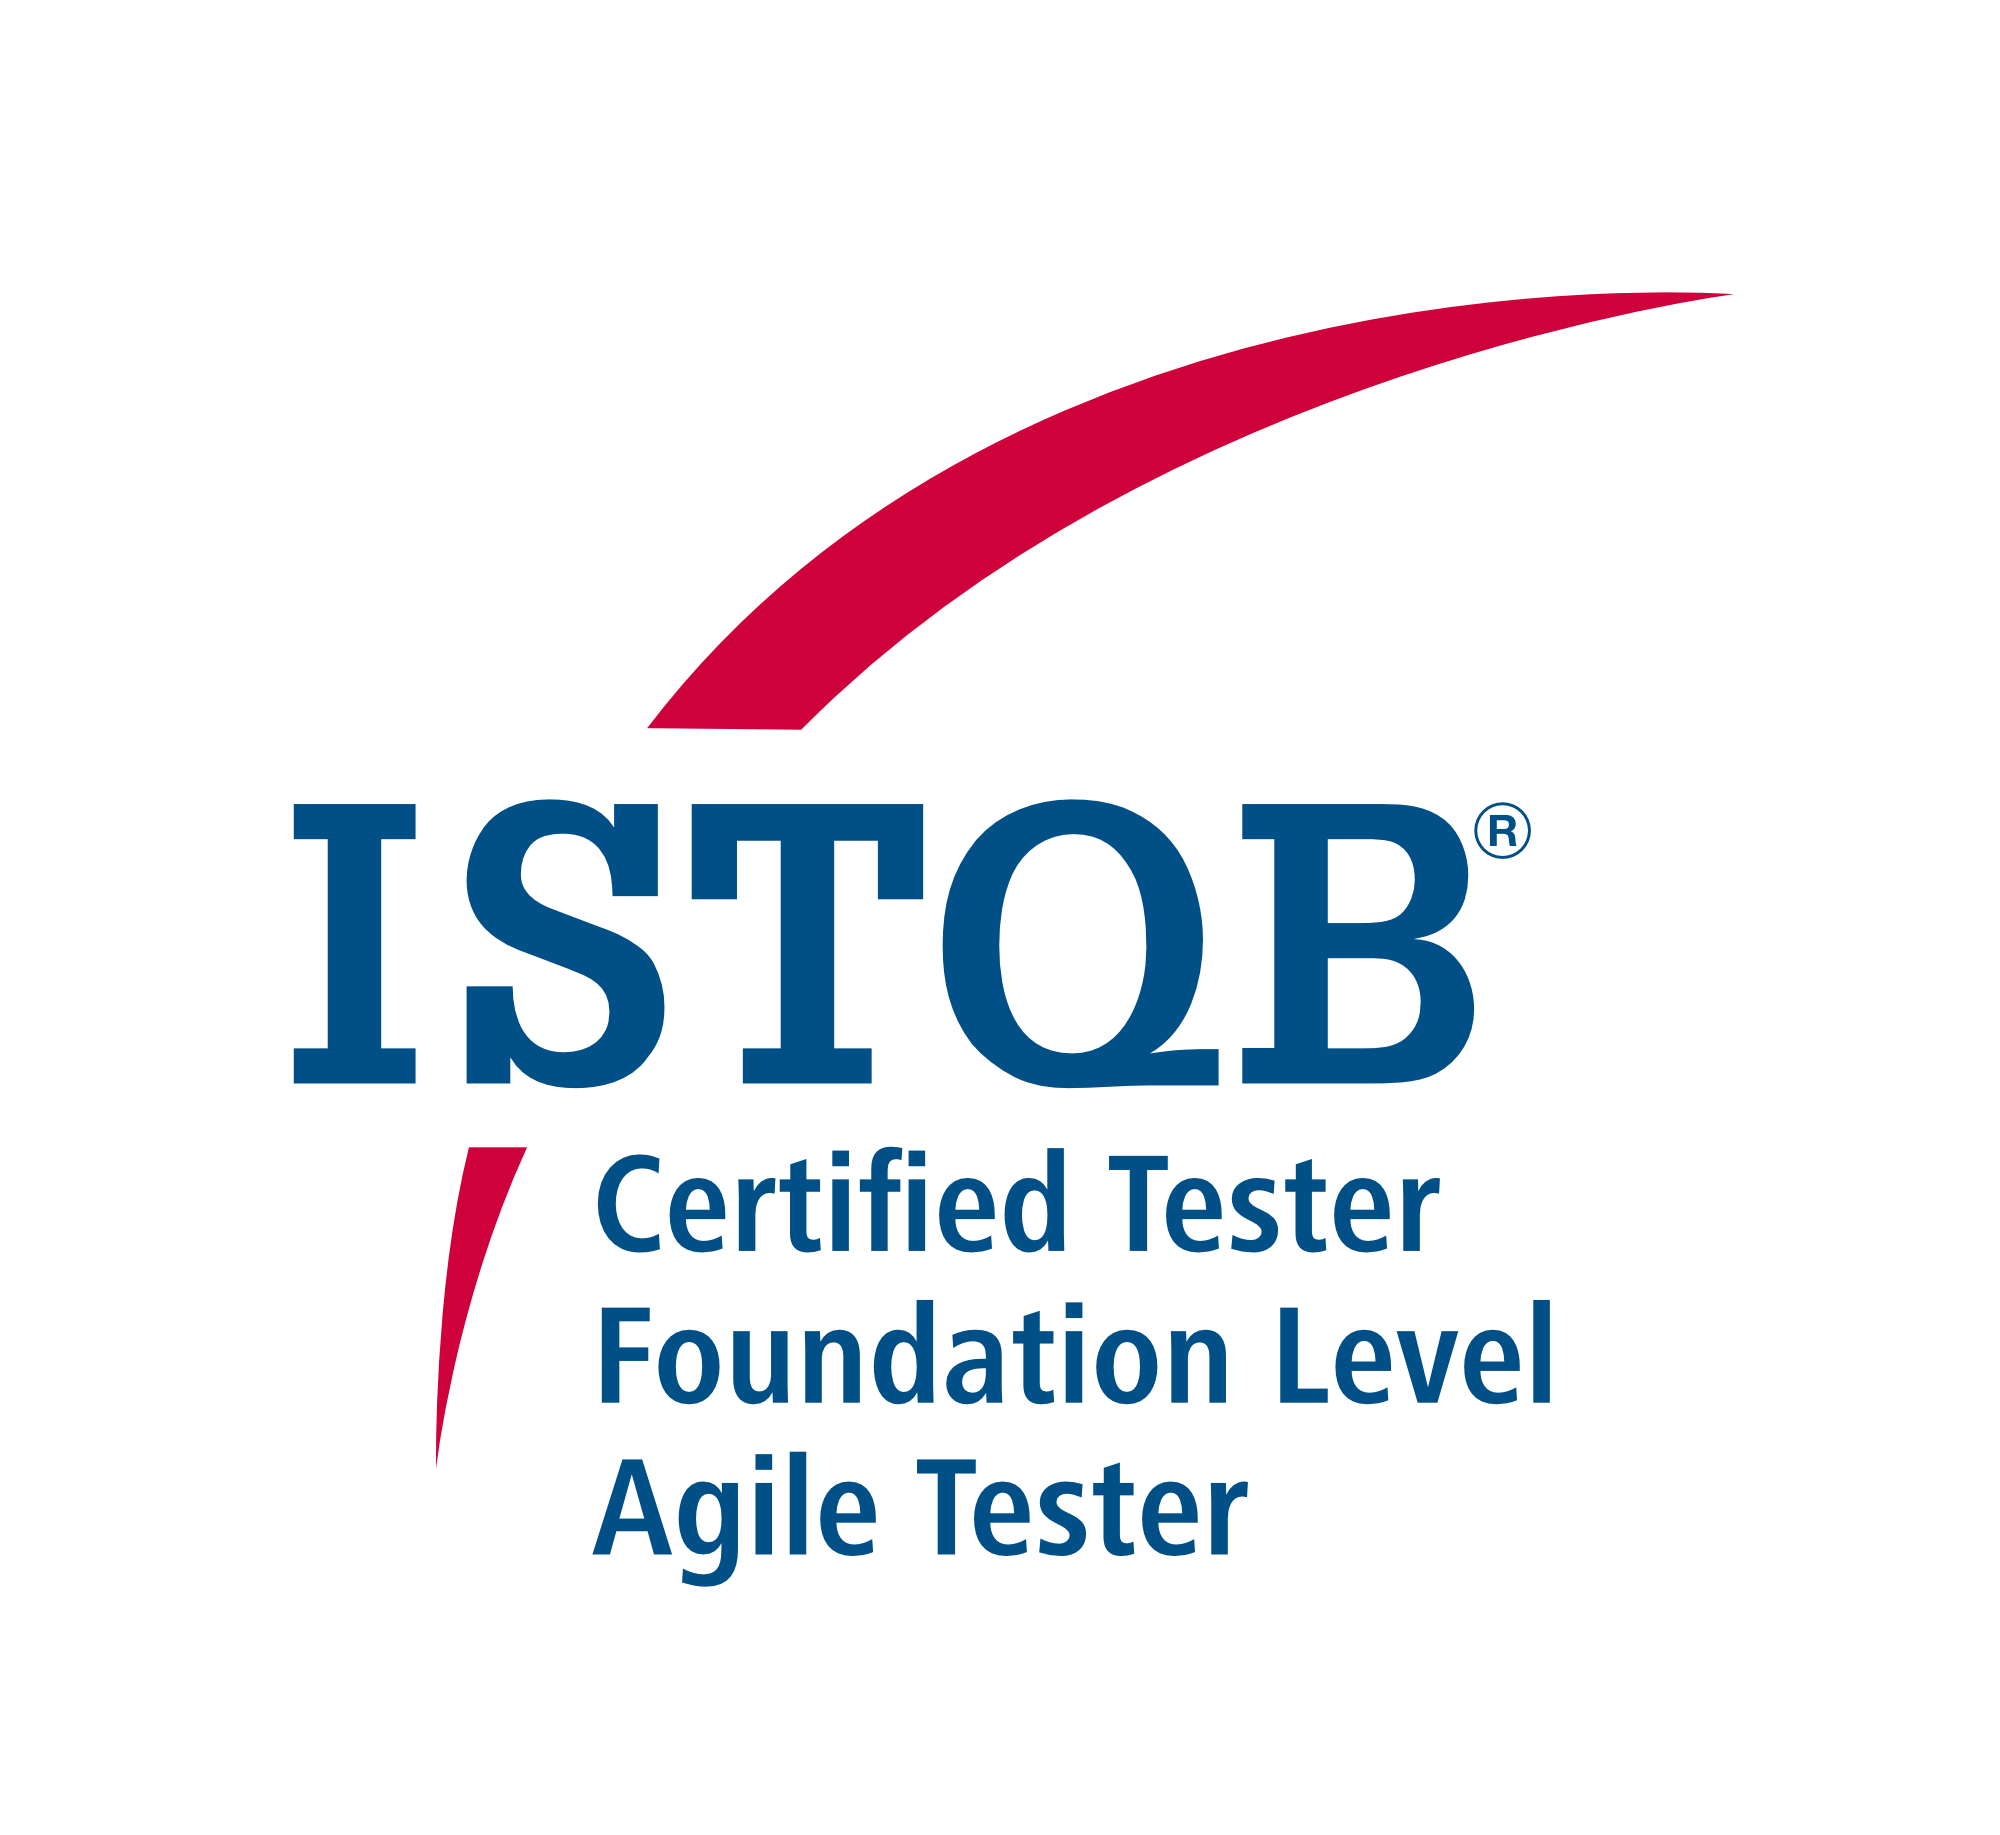 
			ISTQB Certified Tester Foundation Level - Agile Tester
			(CTFL-AT)
		